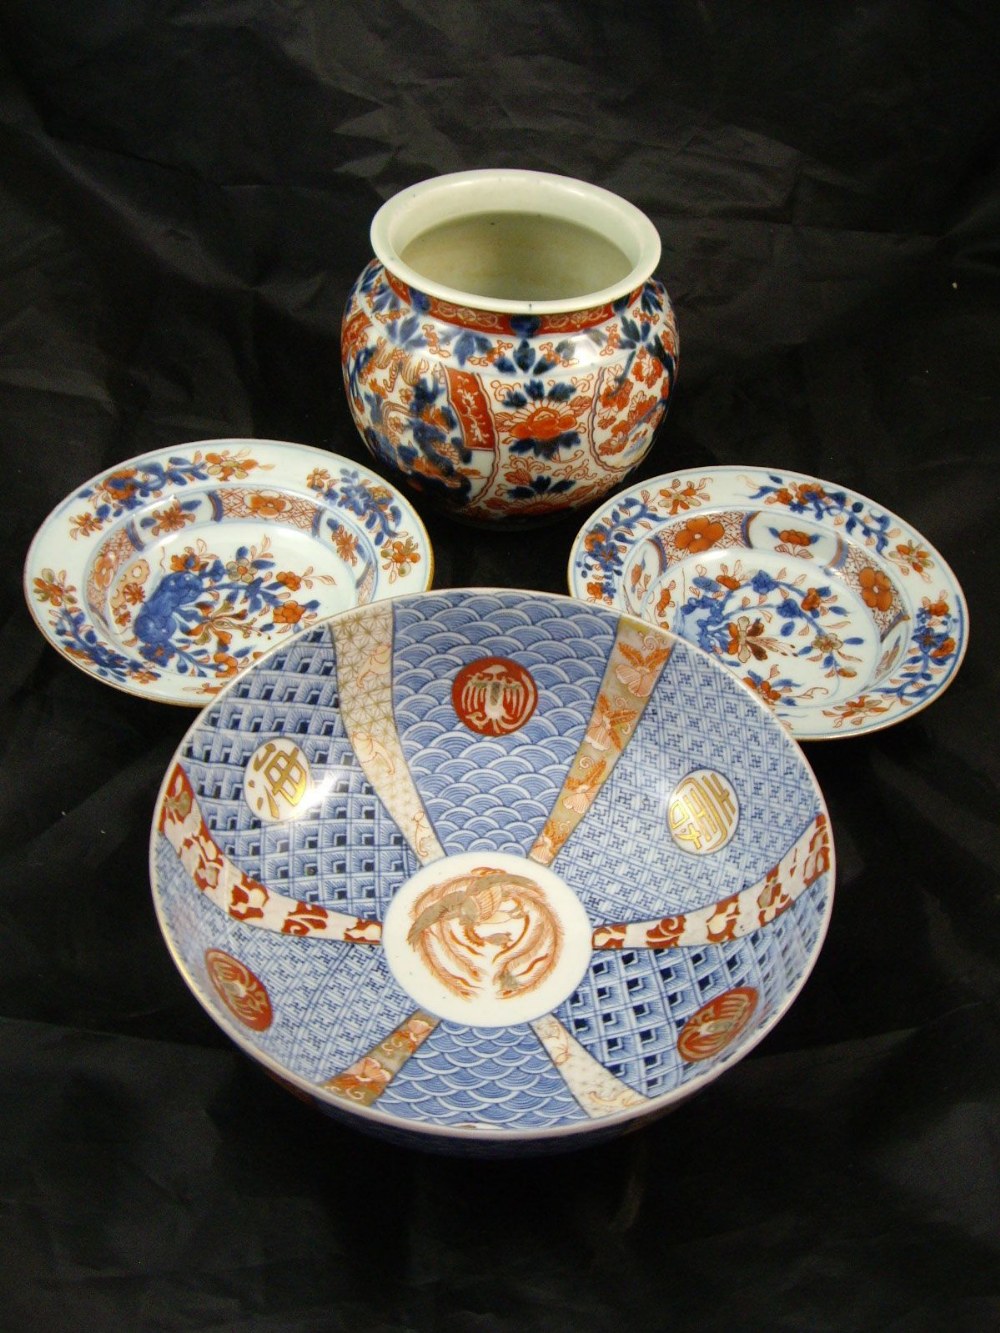 Two small Imari porcelain dishes, an Imari vase and a Chinese porcelain bowl (4 items)